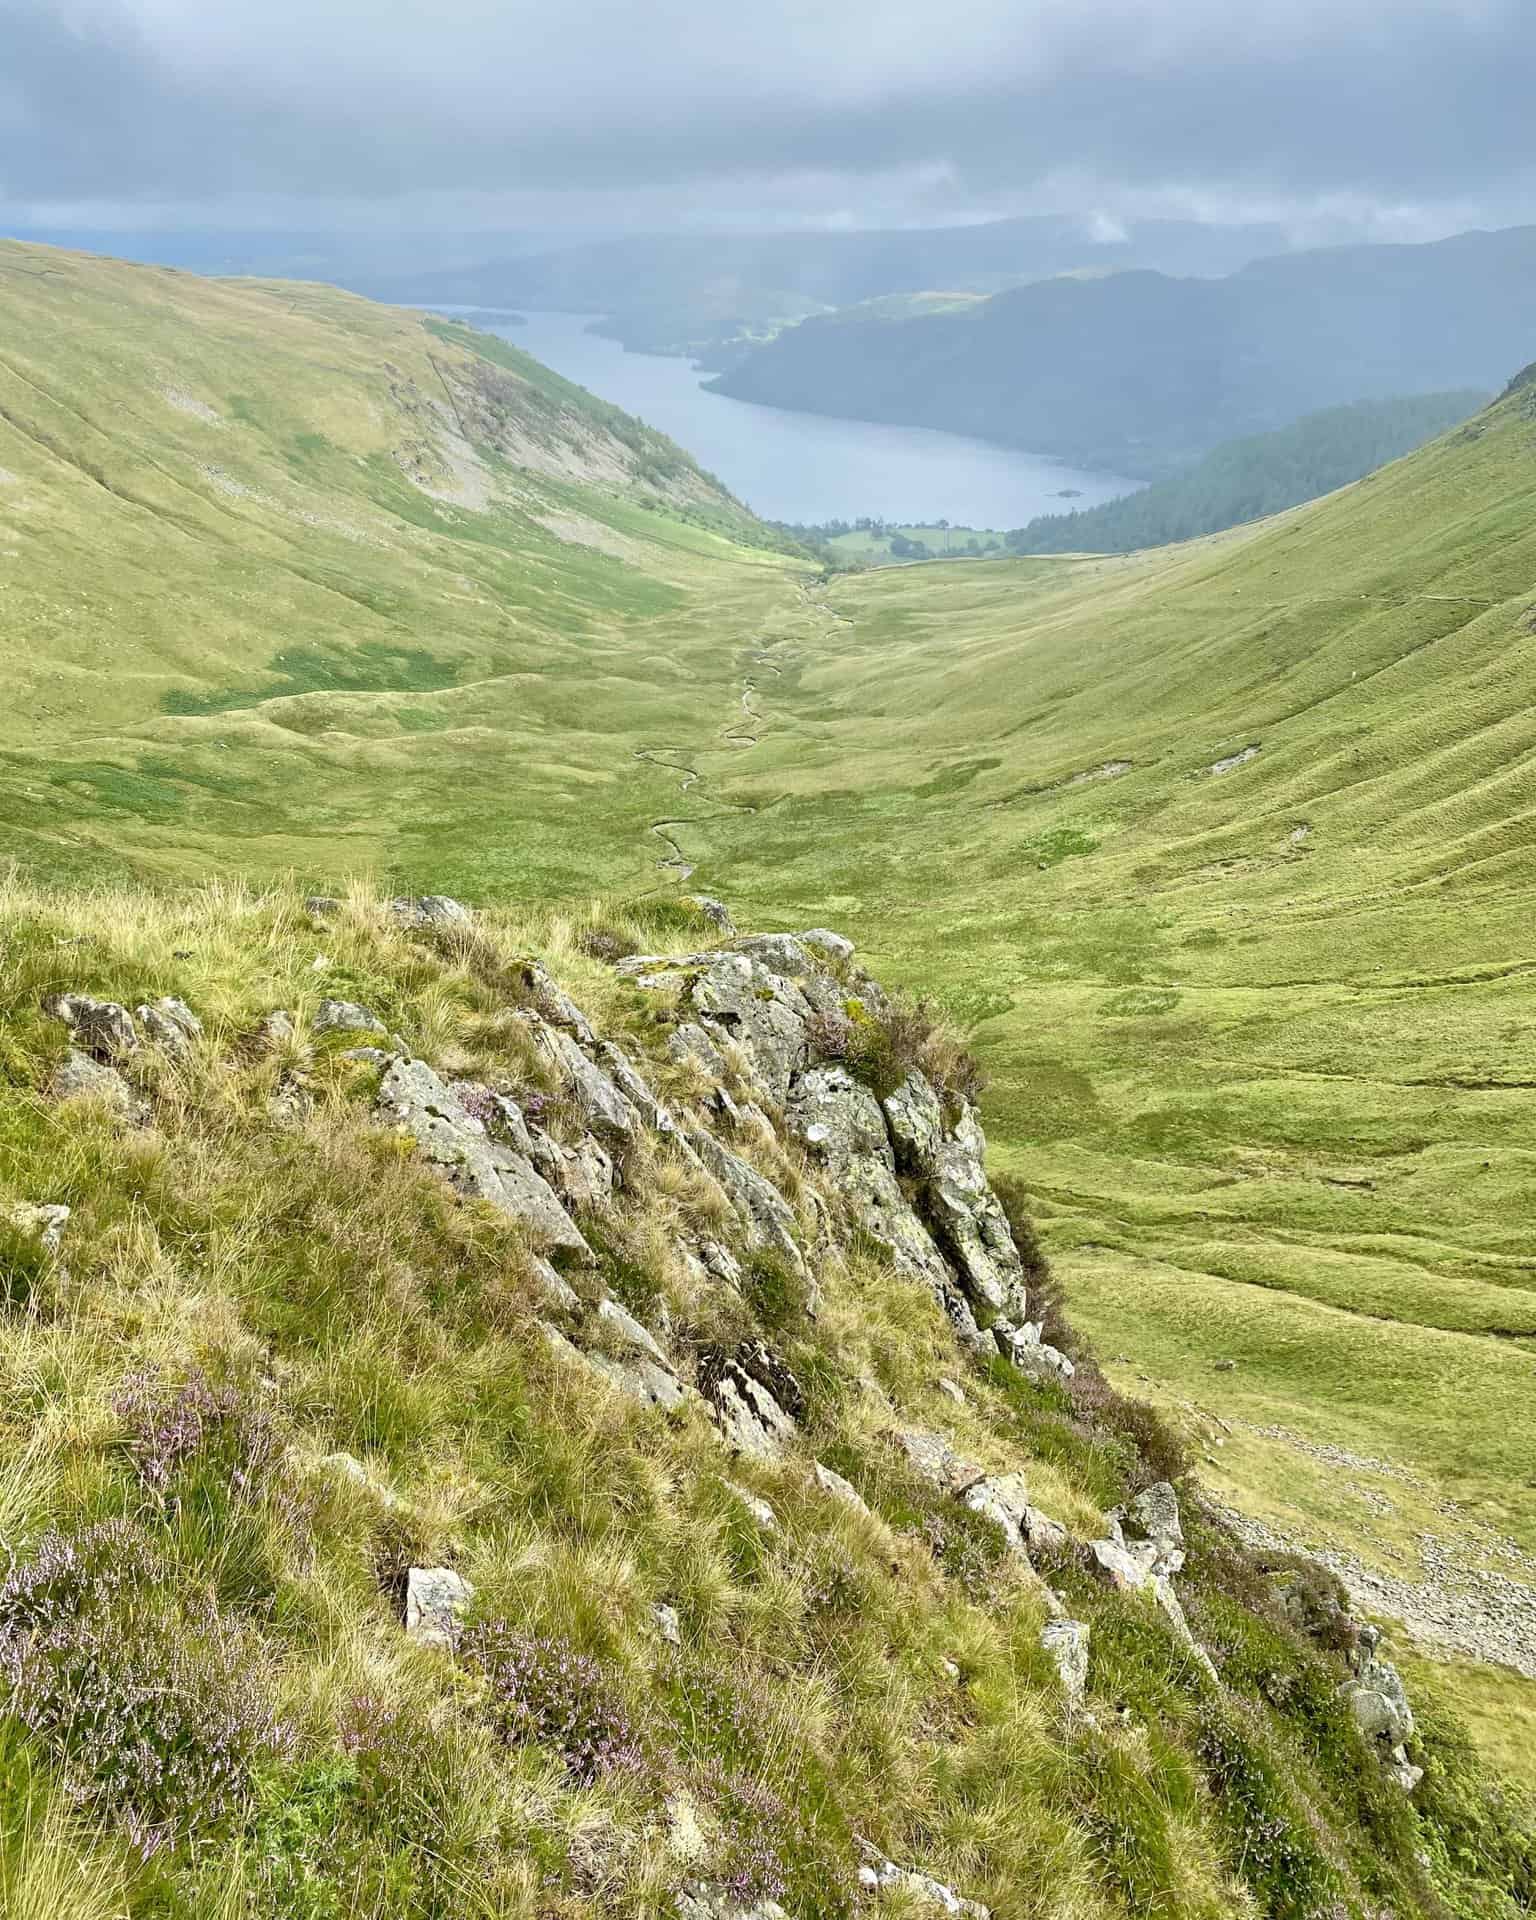 A larger portion of Ullswater becomes visible as we make our way around the Glencoyne valley.